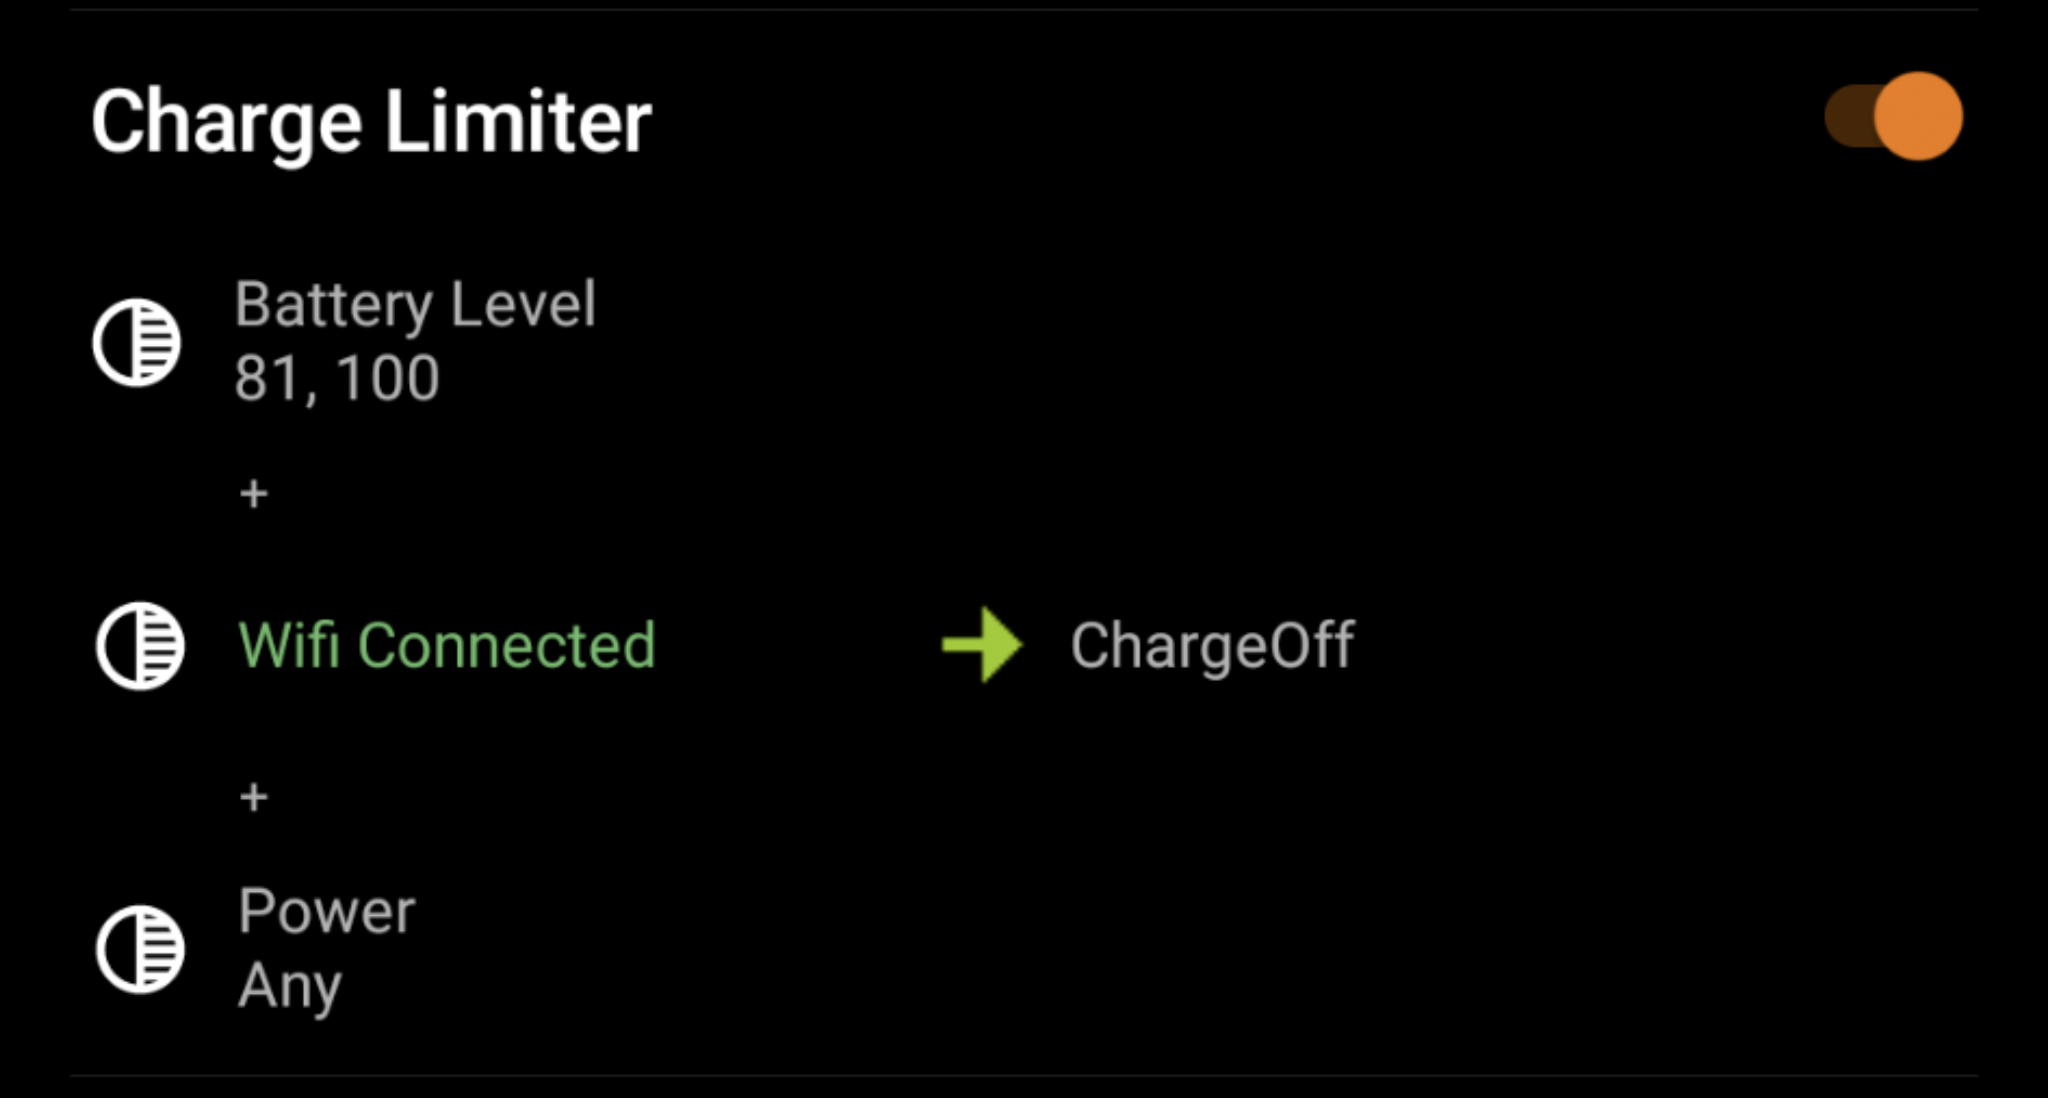 Tasker profile to kill power above 80%